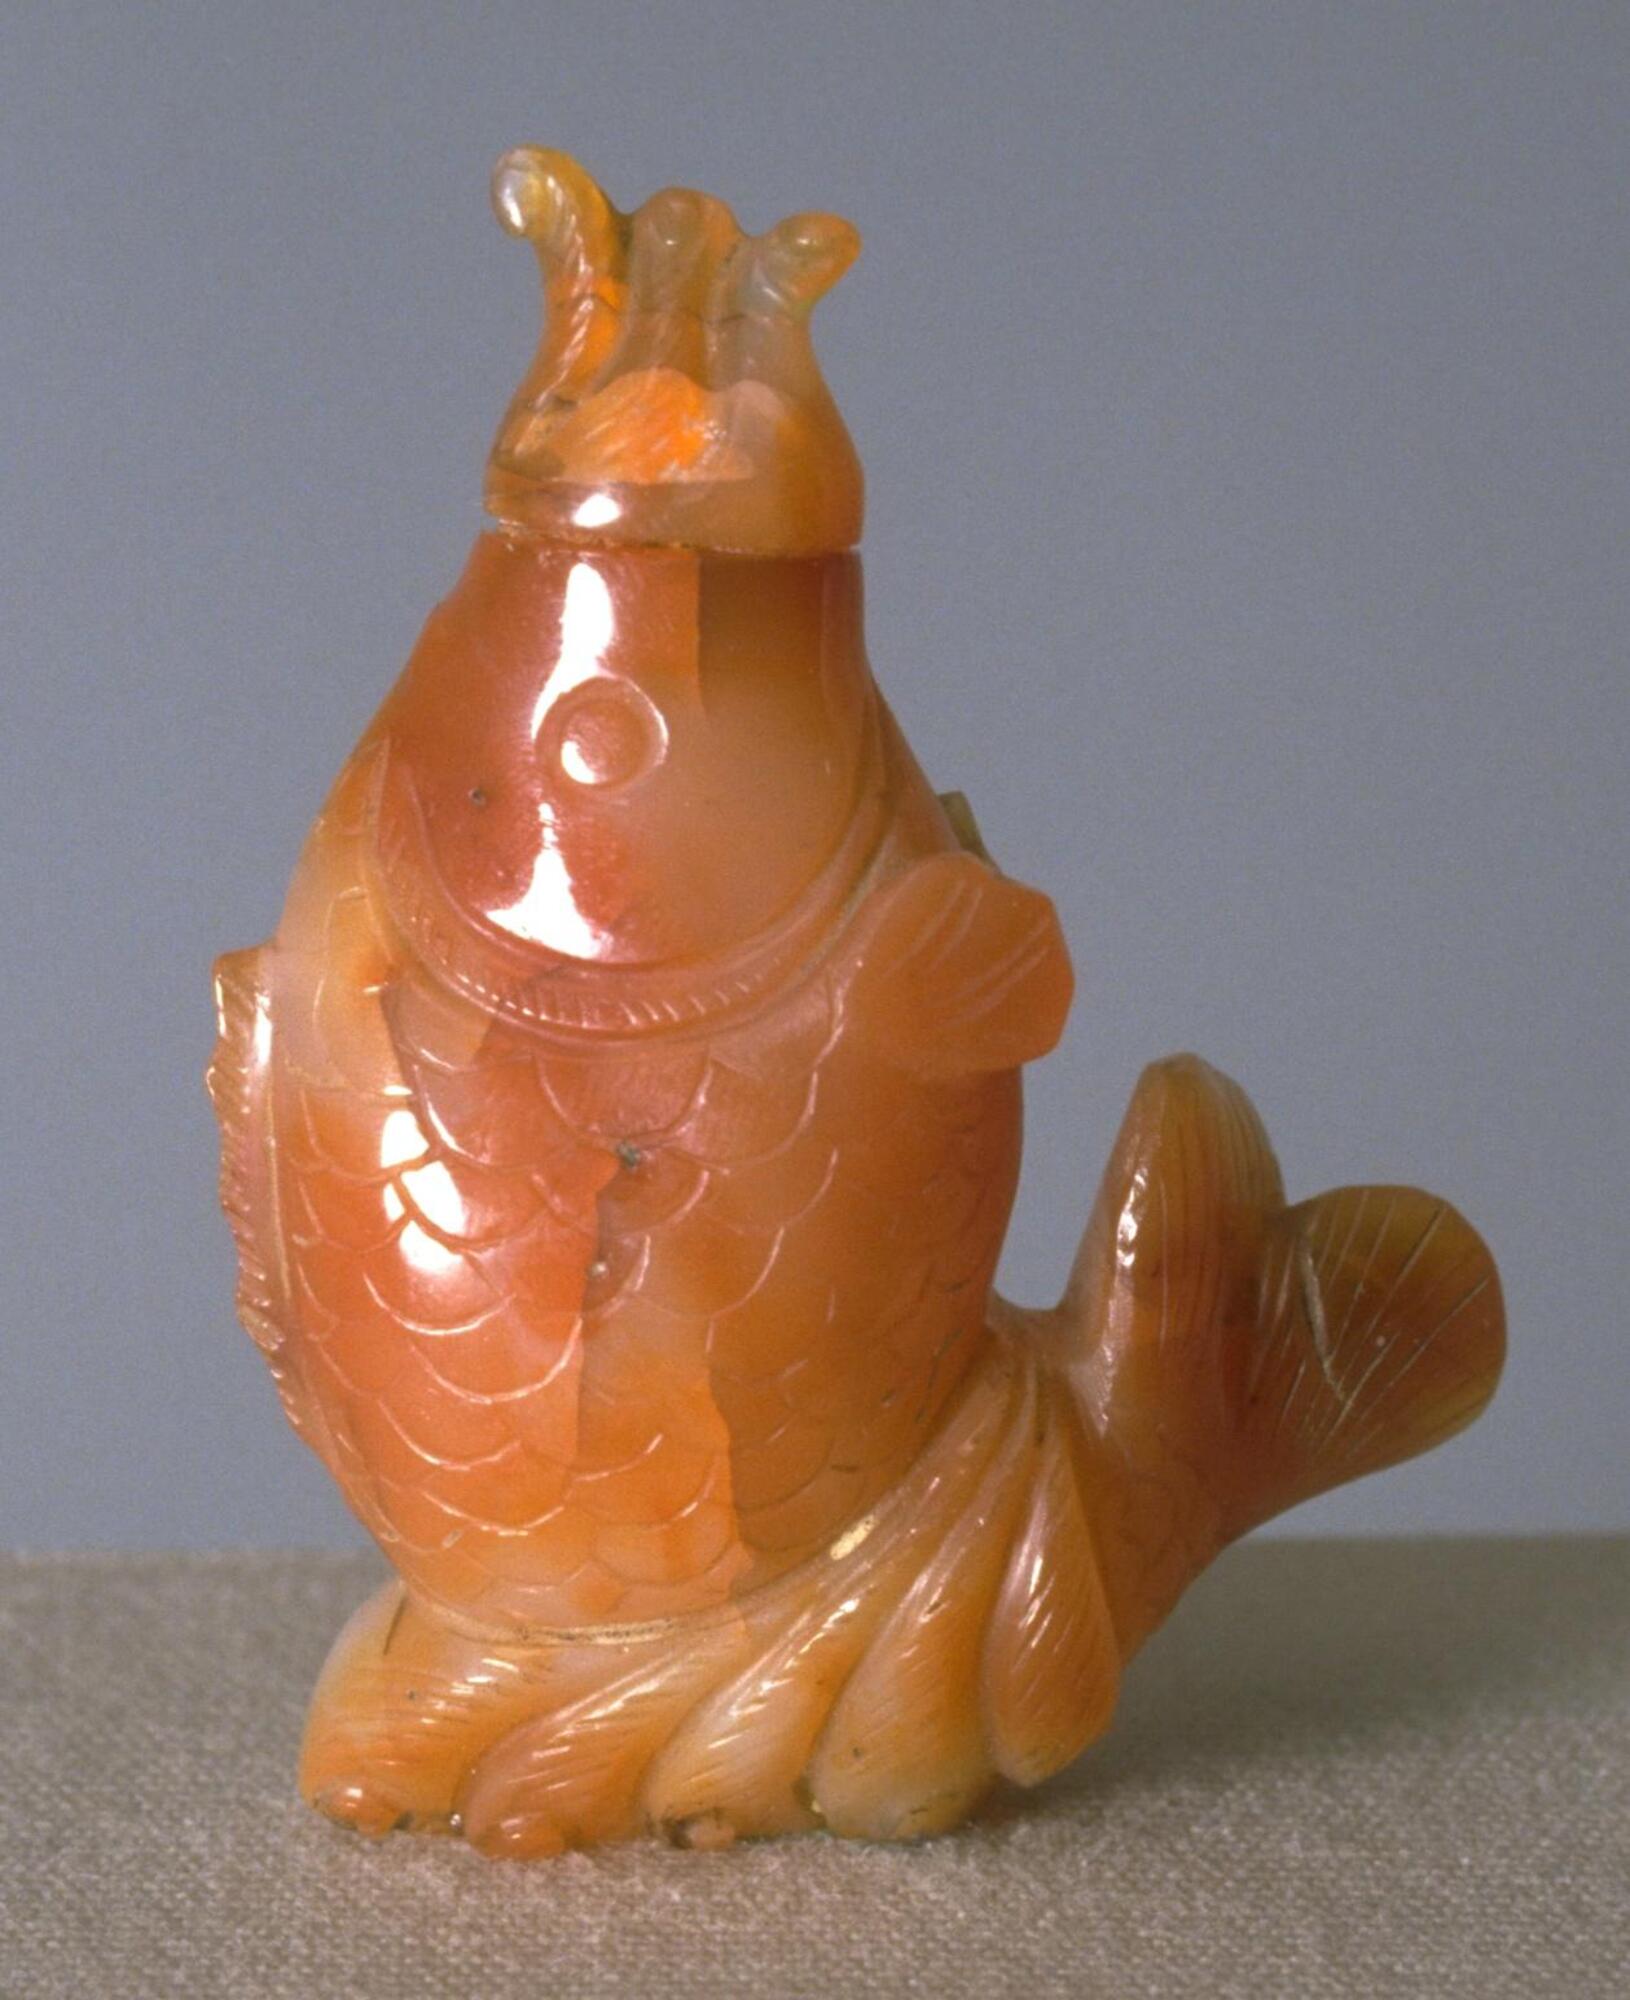 A carnelian snuff bottle in the shapes of a carp. Its head is raised and in its mouth is a stopper.